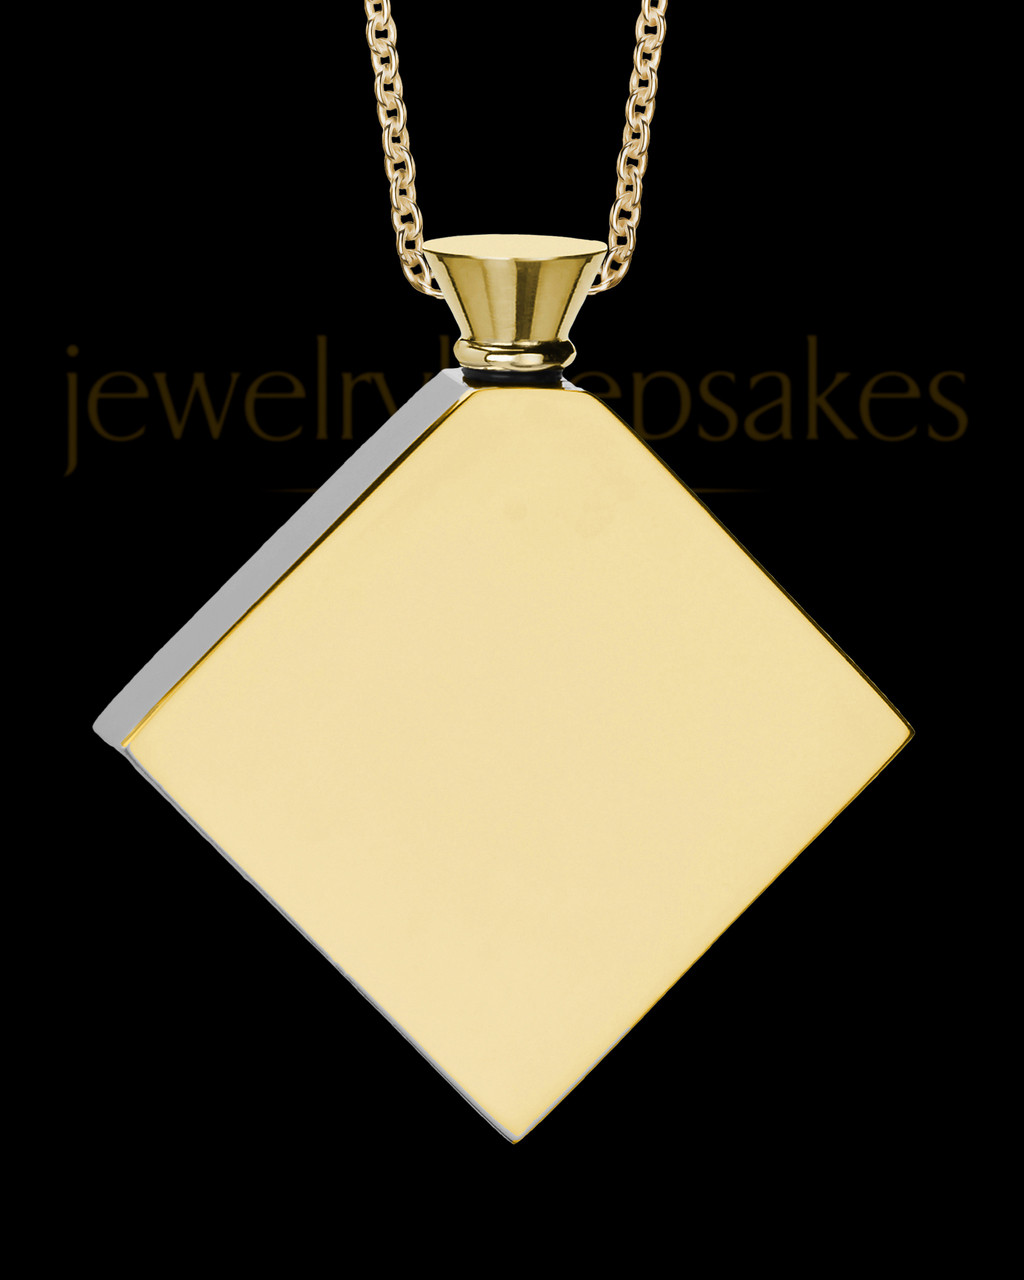 Solid Gold and Diamond Cremation Jewelry - Perfect Memorials